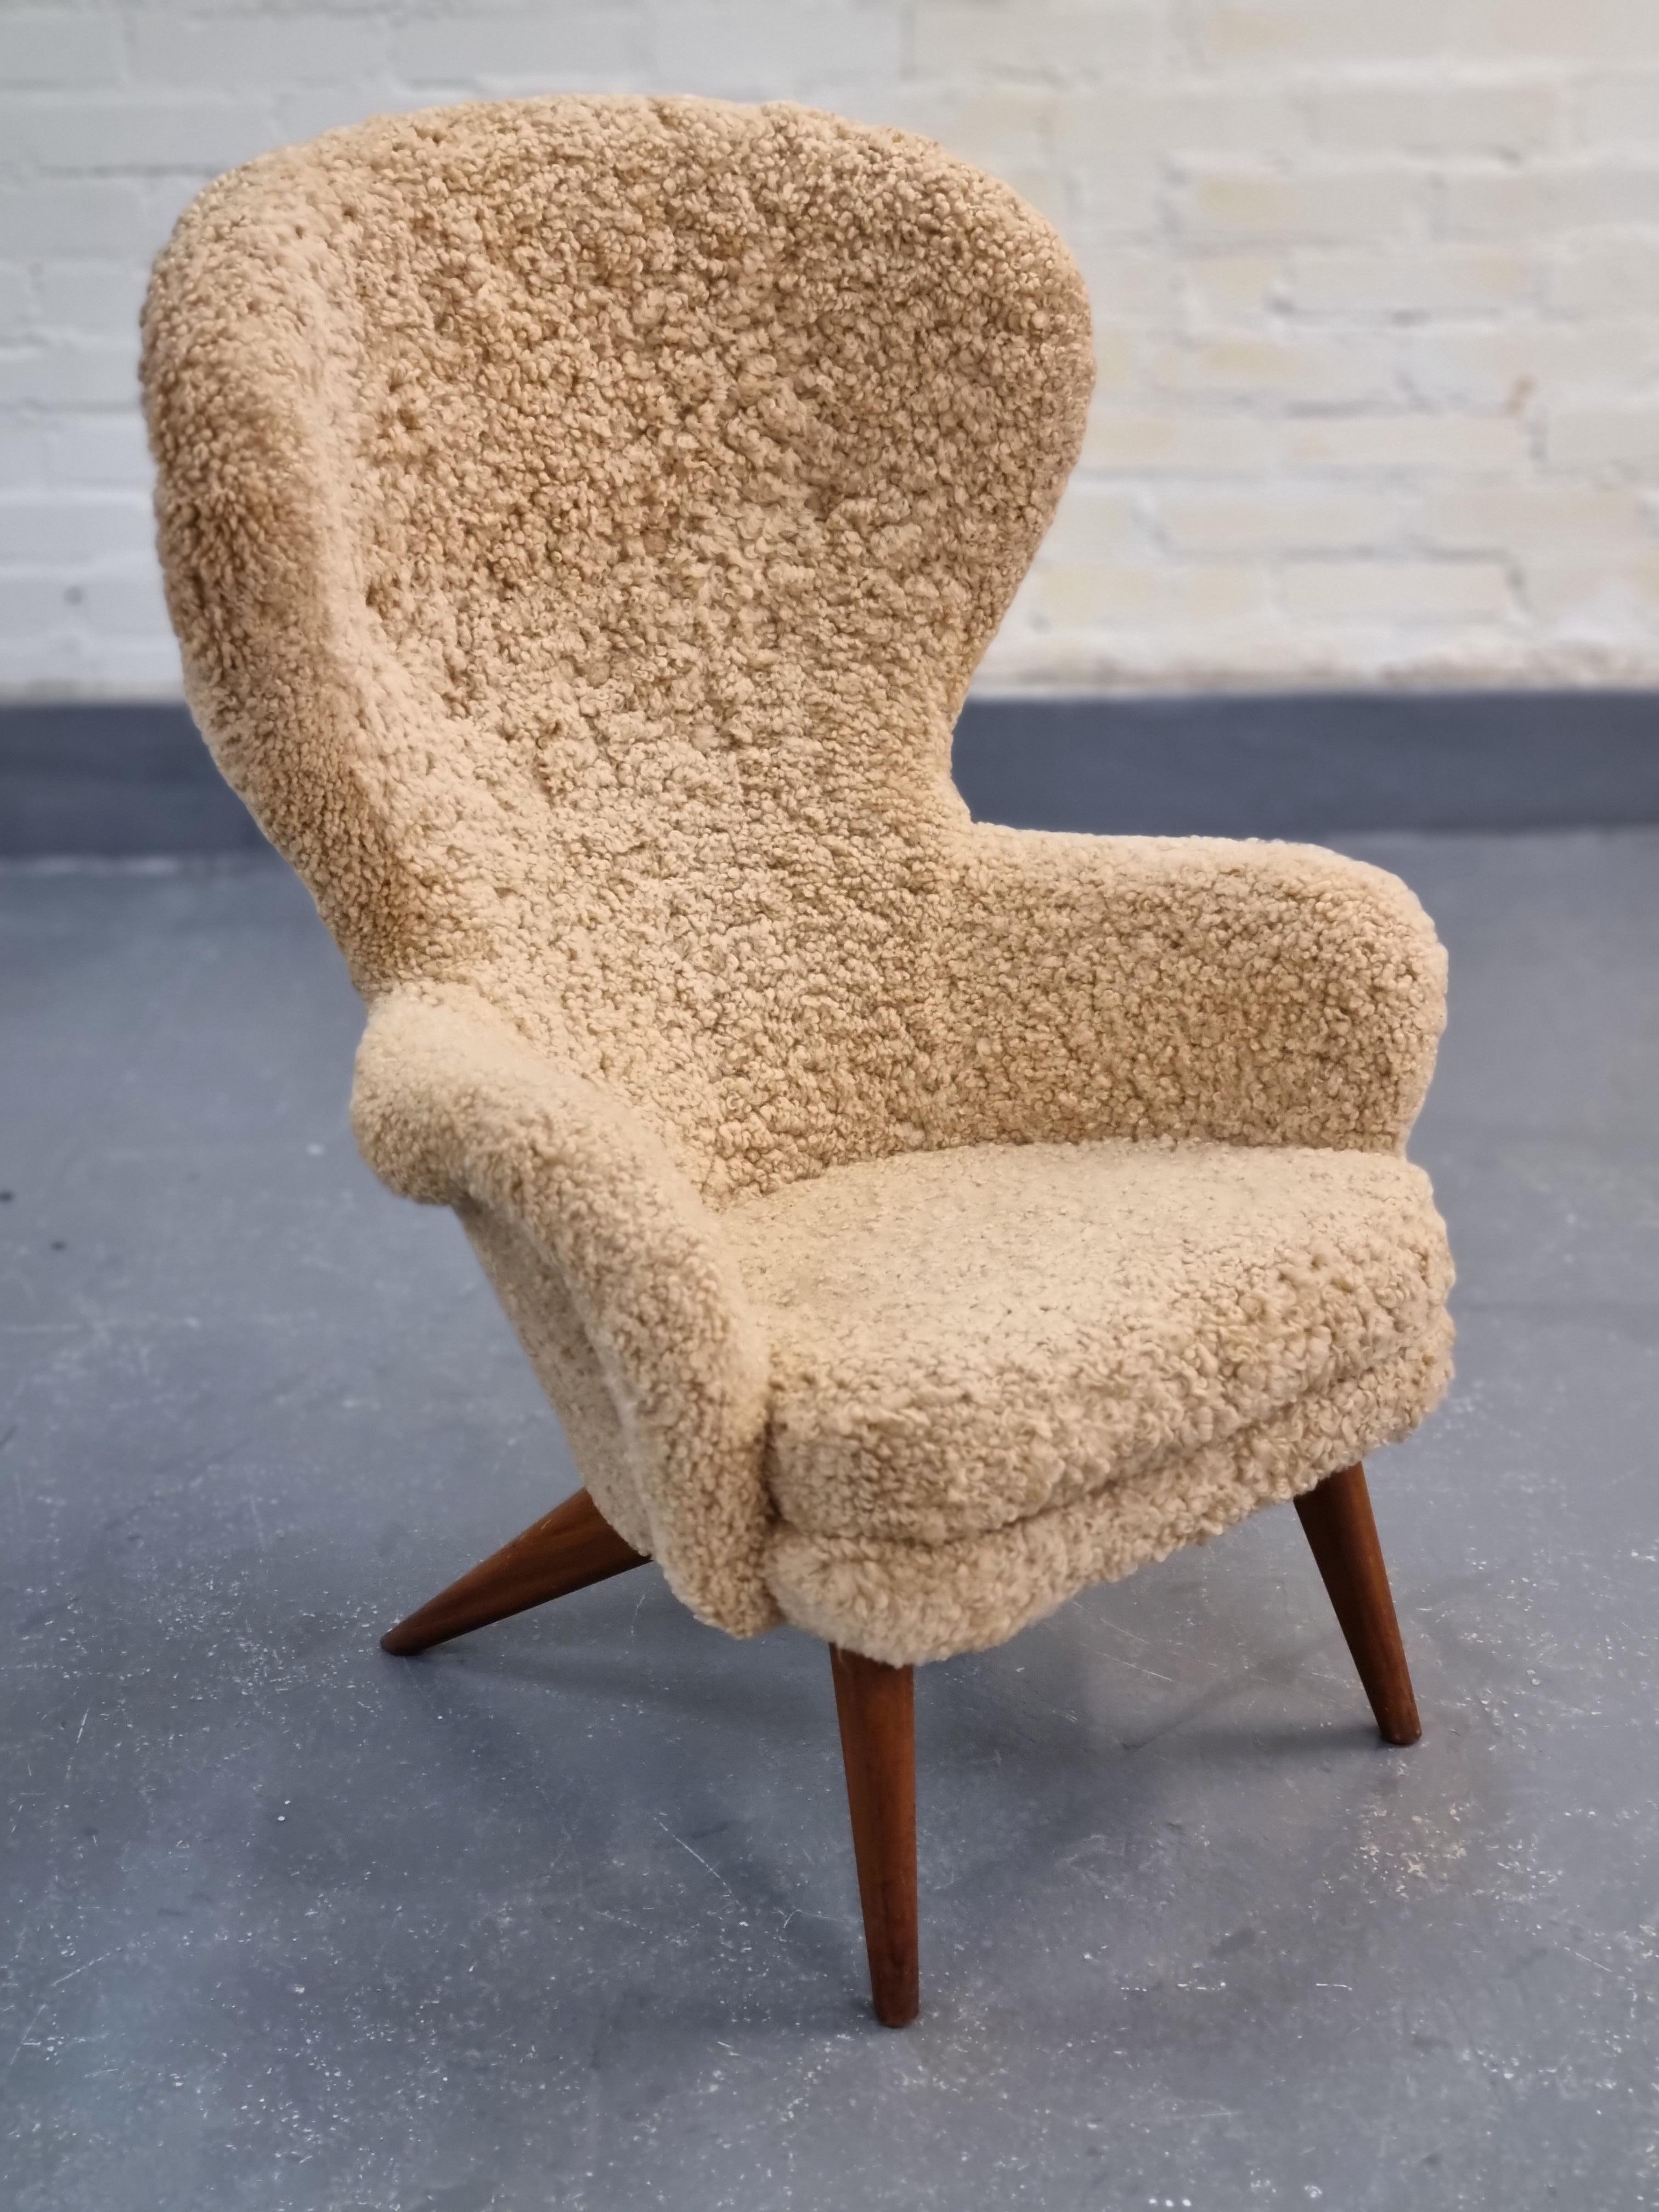 Carl-Gustaf Hiort af Ornäs was known as the master of shapes. It's said that in his designs he always strived to make the objects beautiful from all angles, and the Siesta armchair is a perfect example of that. 

The chair is big and impressive, but